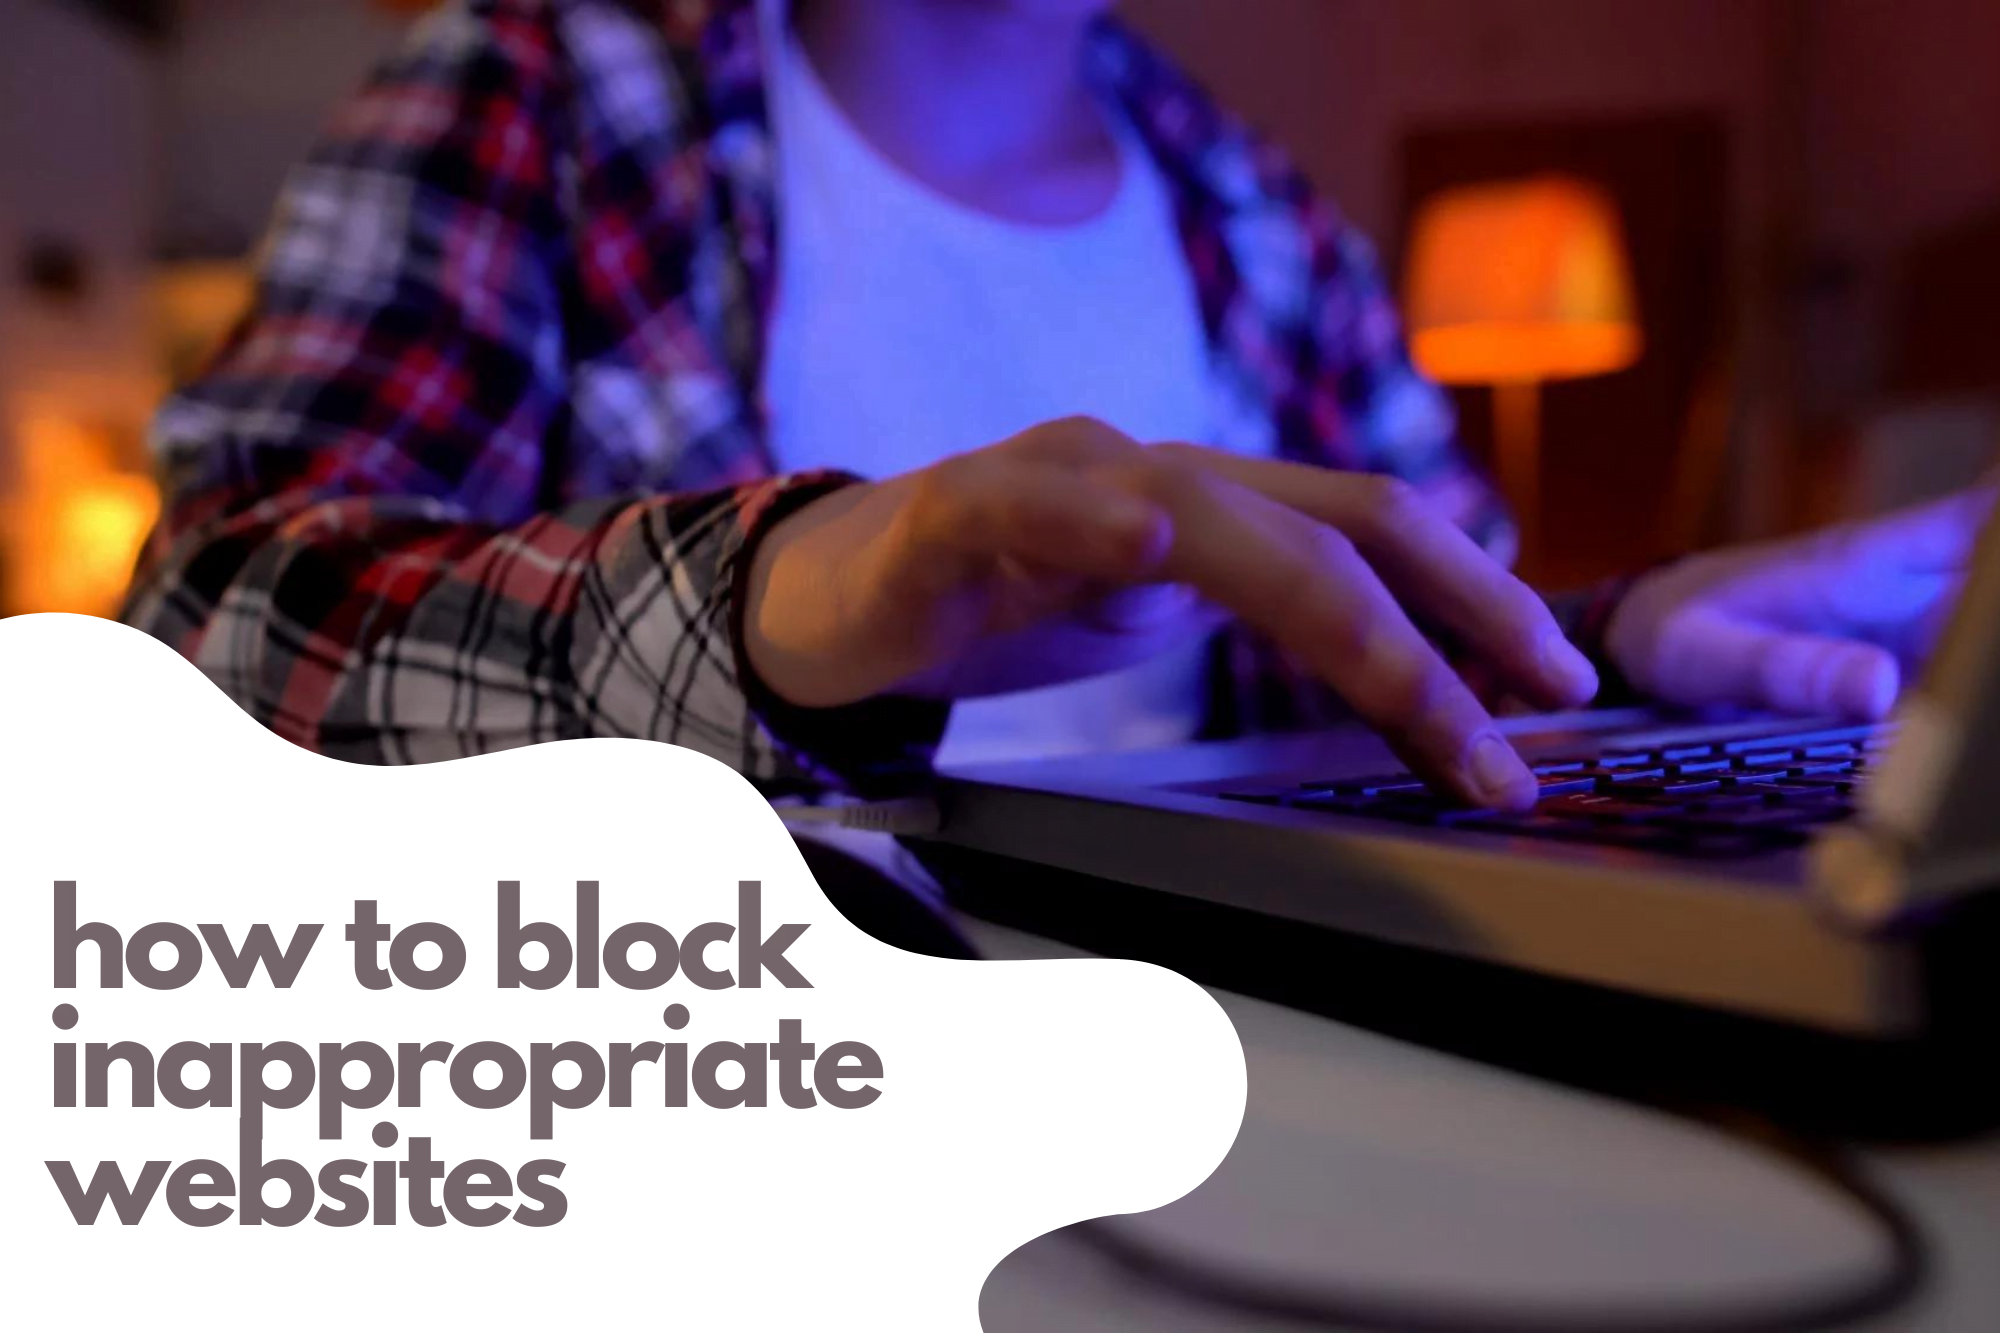 How to block inappropriate websites on Android